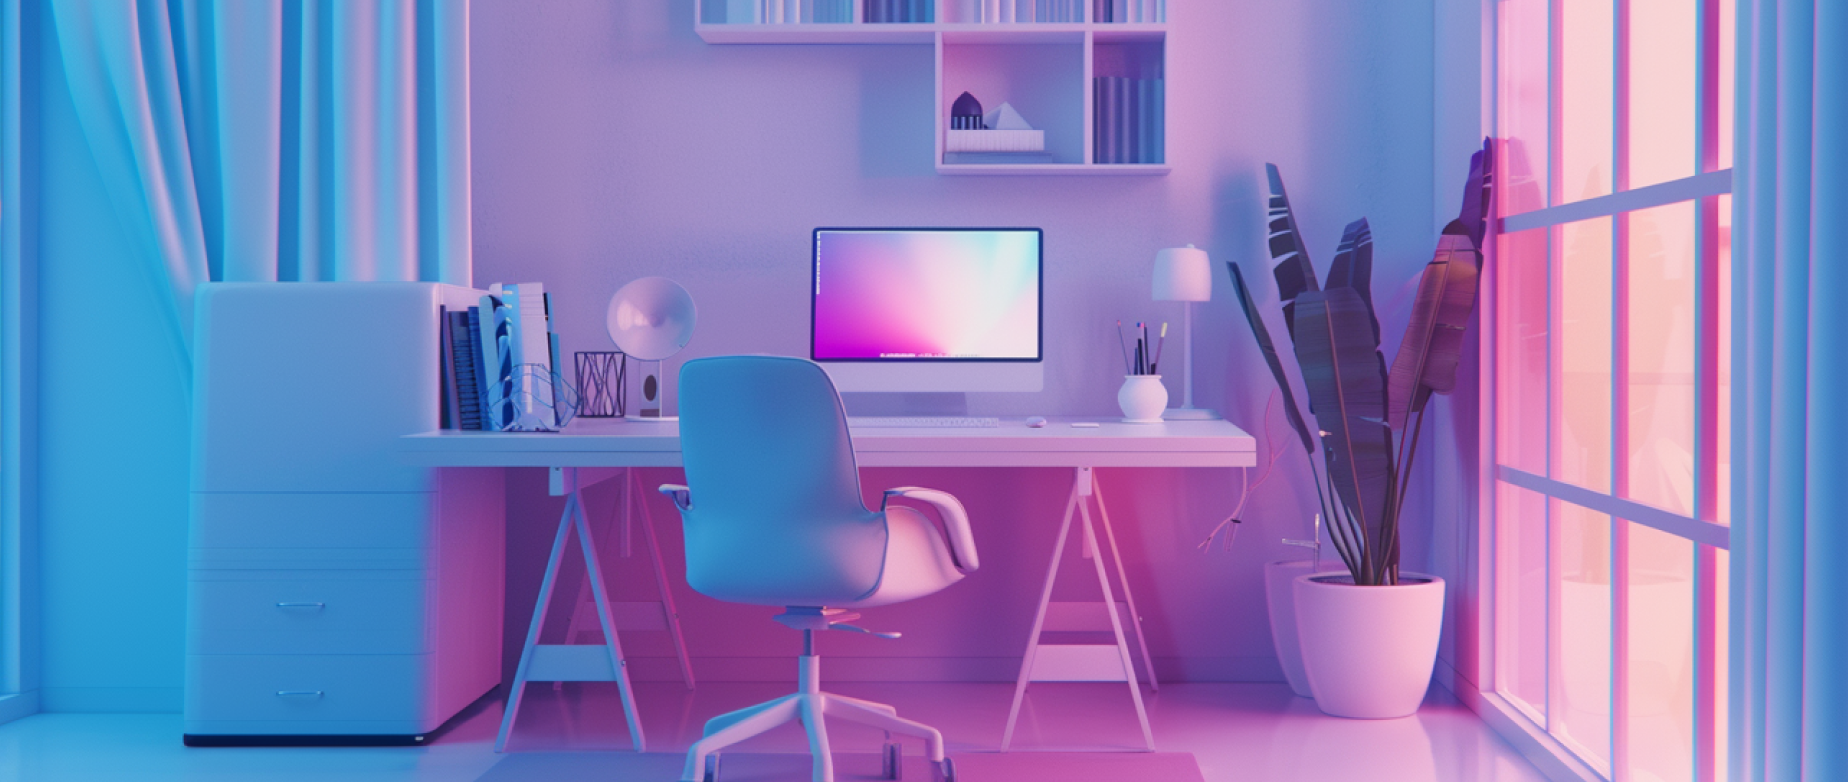 A home office set up with blue and pink lighting.